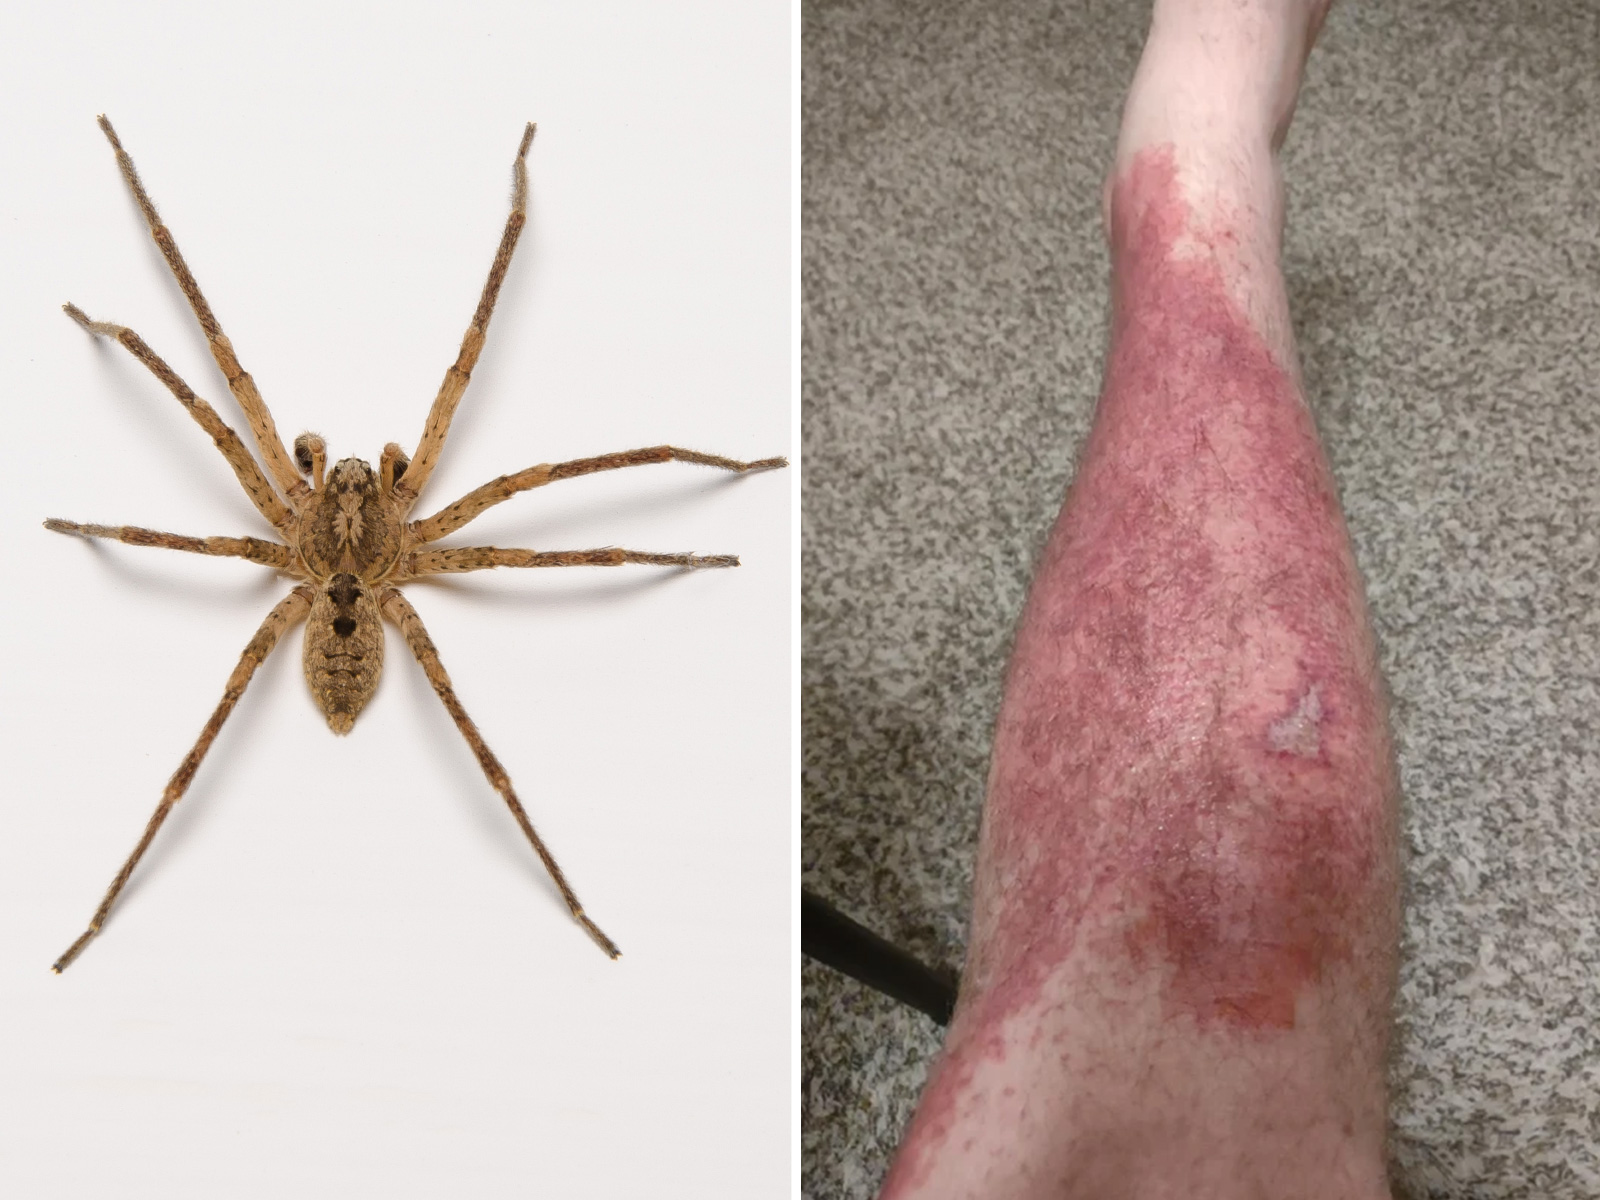 The Brown Recluse Spider: Its Reputation Is Worse Than Its Bite